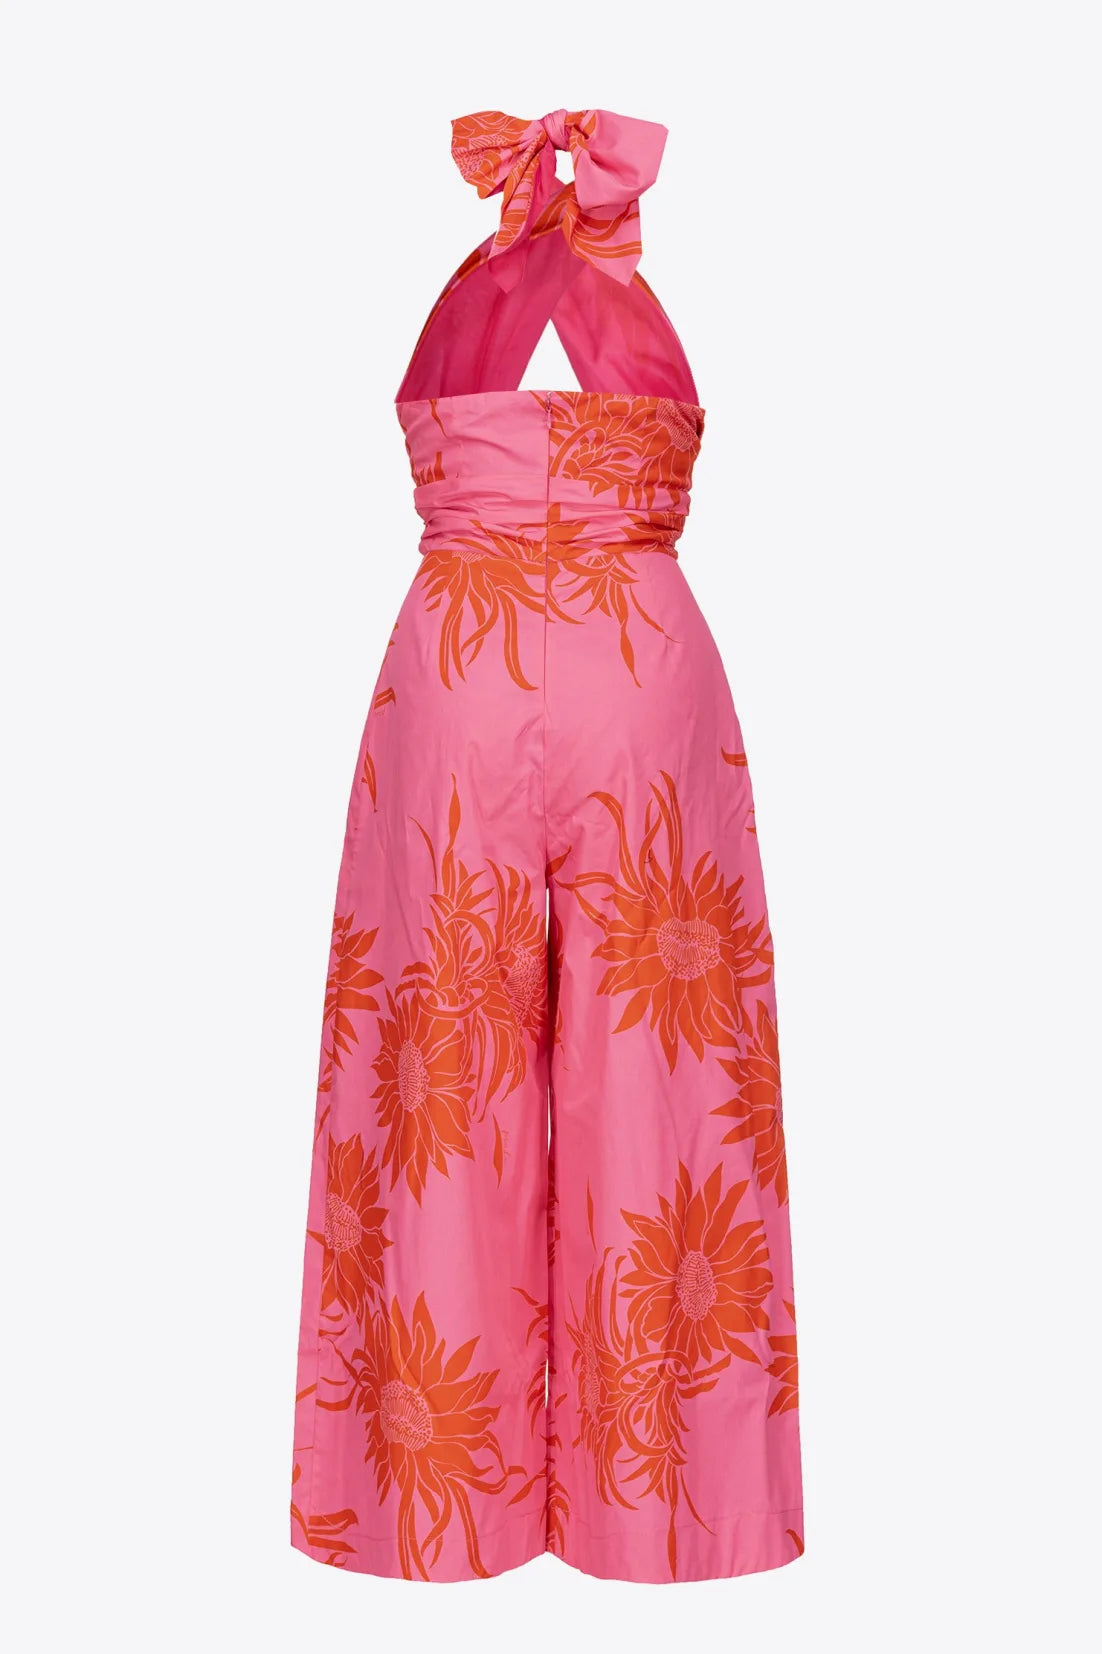 Tardivo jumpsuit with printed flowers by Pinko